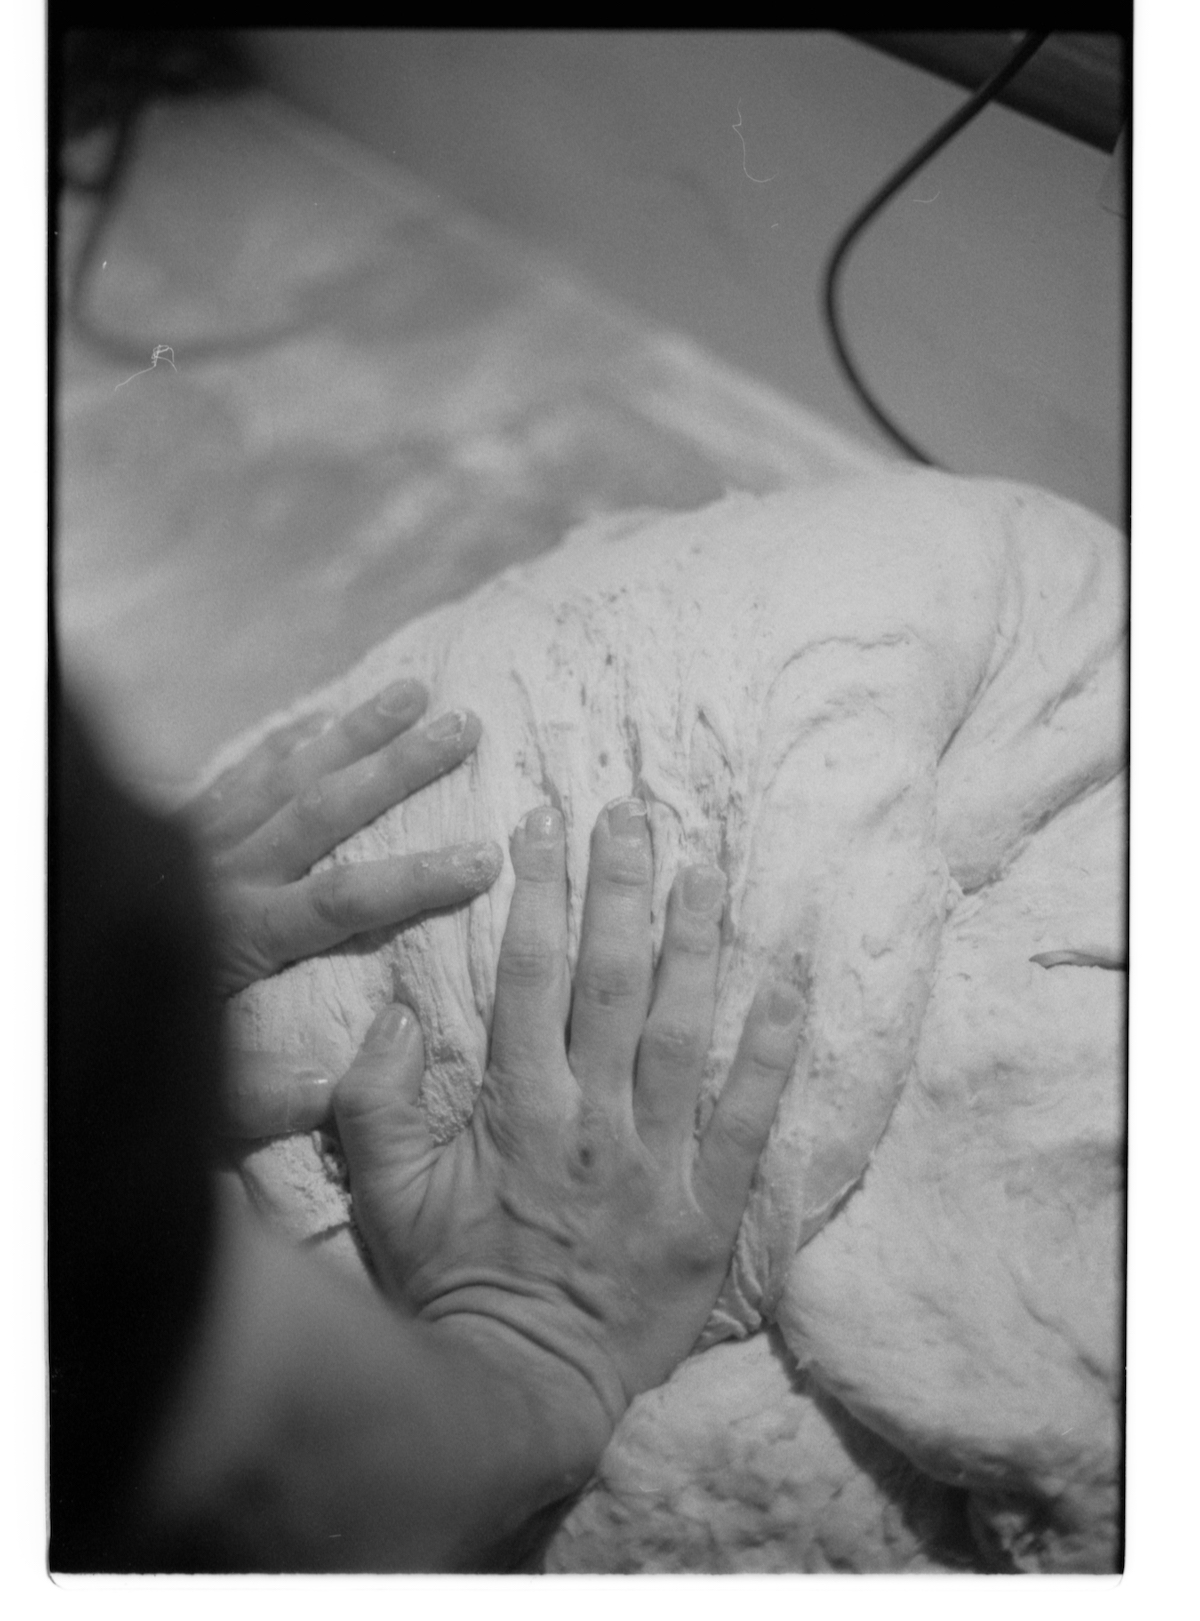 militant bakers - black and white blurry picture of two hands in bread dough